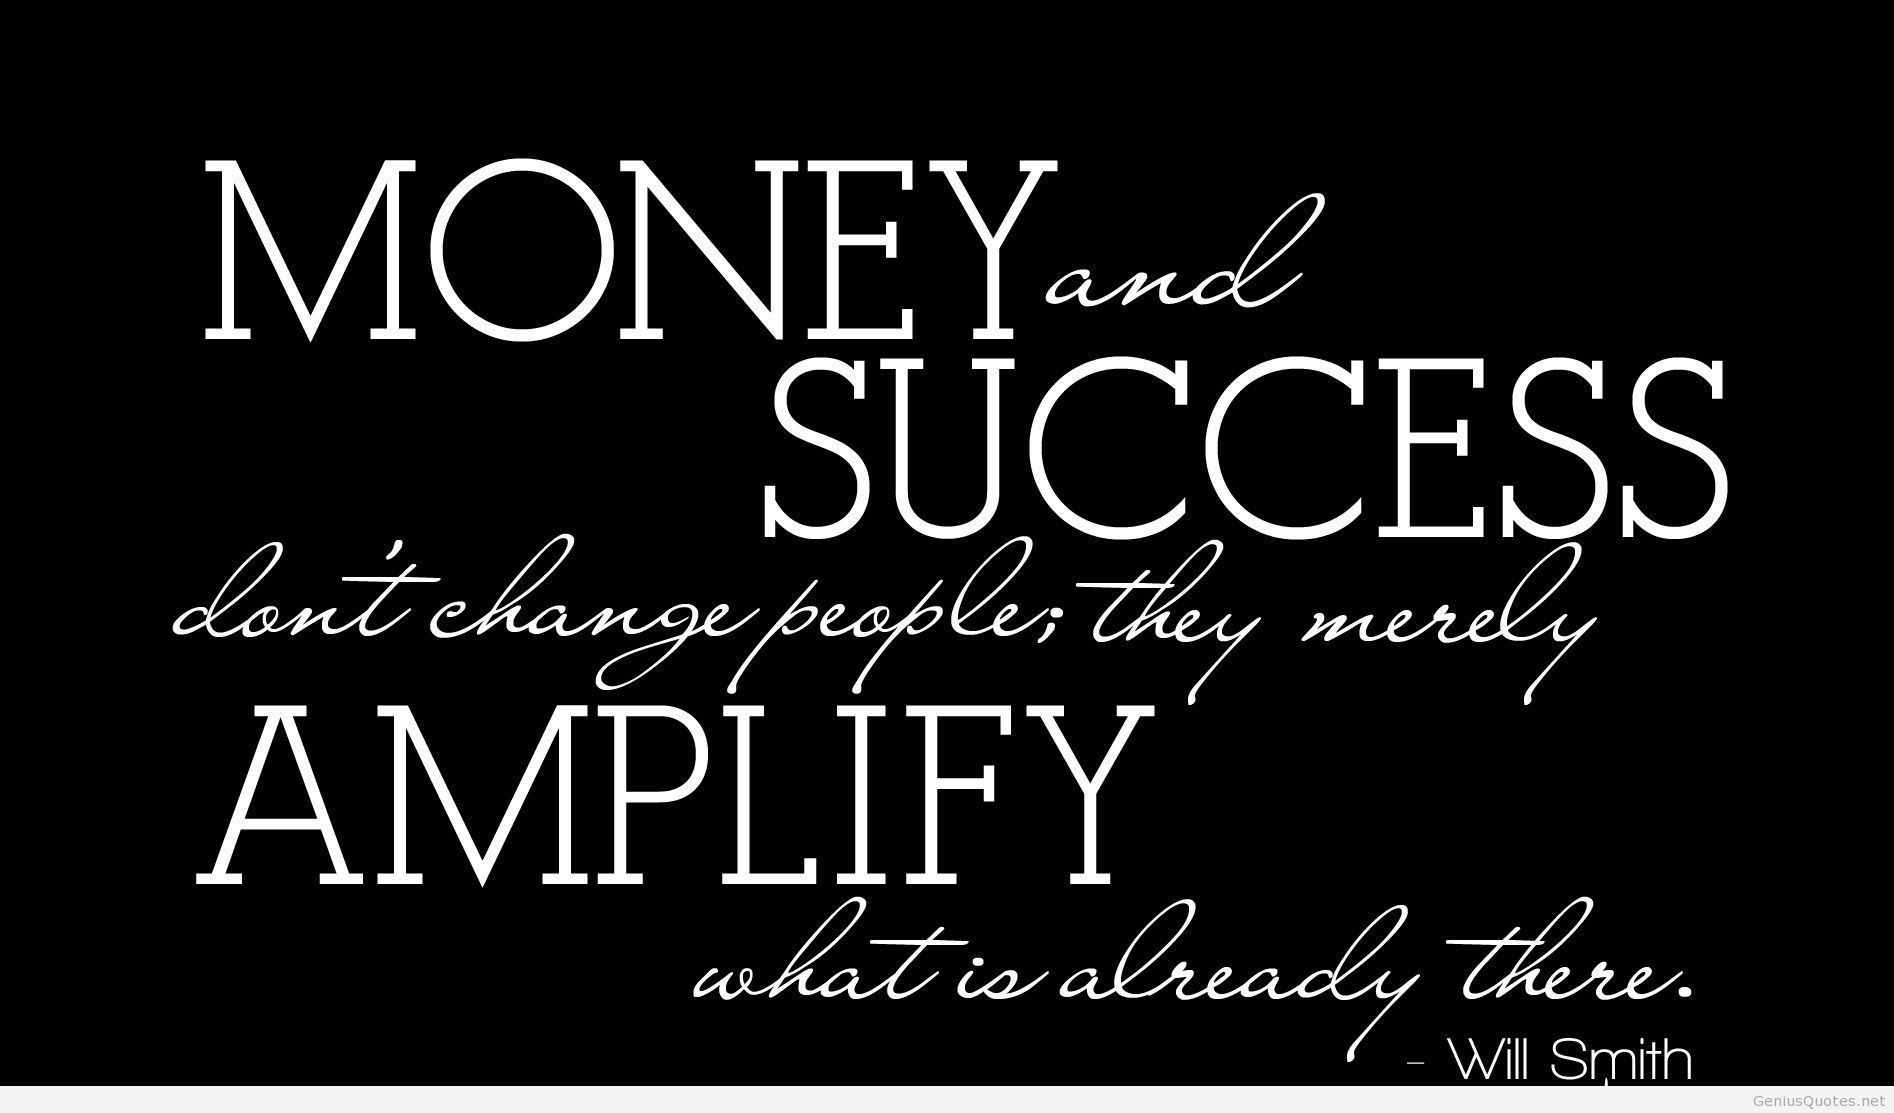 Funny-quotes-hd-wallpaper-about-money-and-success.jpg